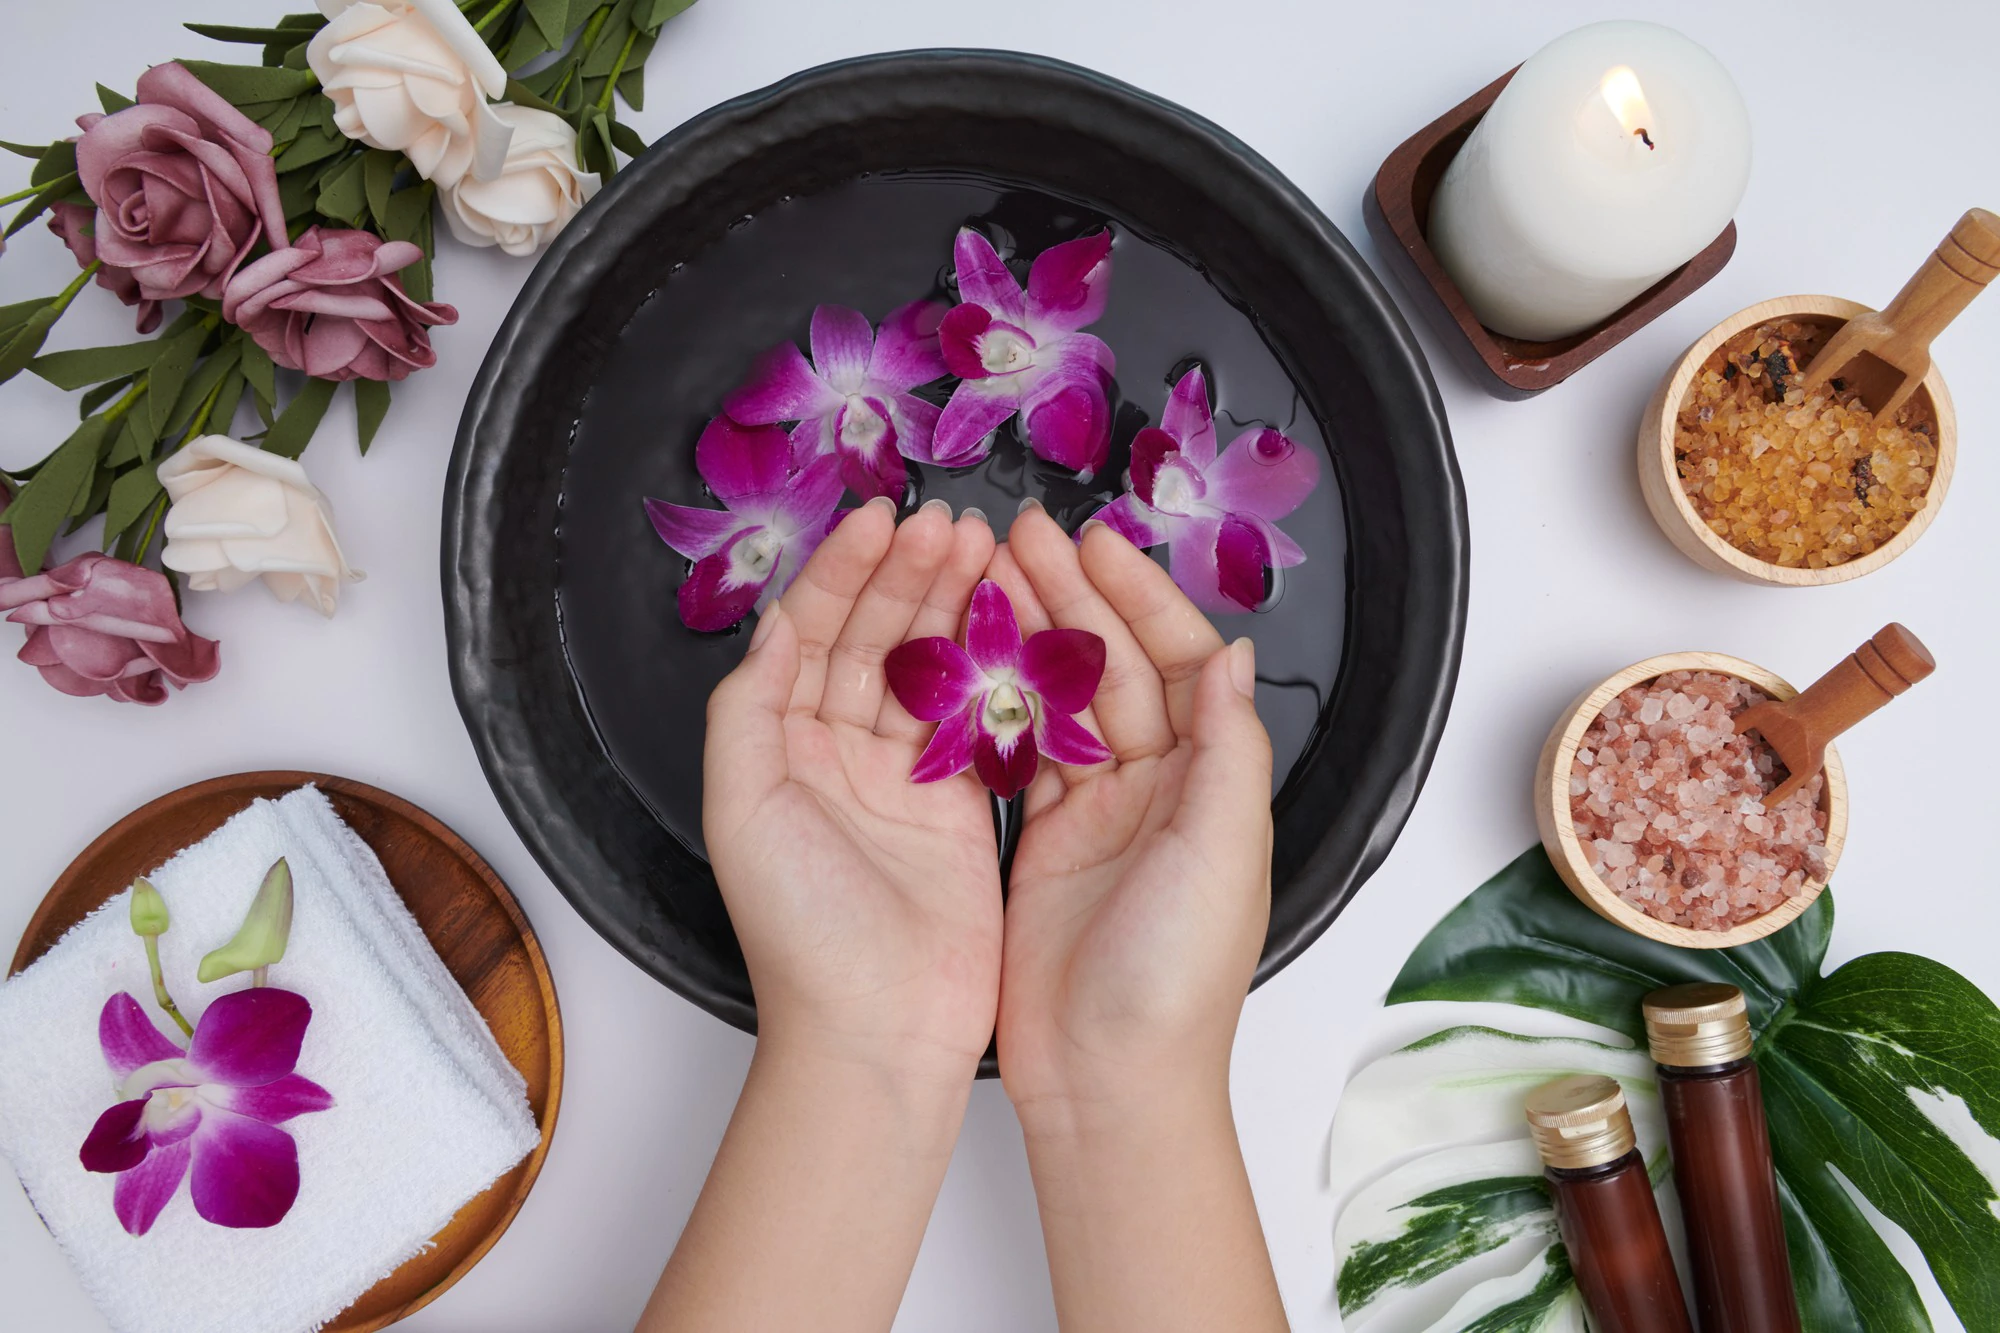 woman-soaking-her-hands-bowl-water-flowers-spa-treatment-product-female-feet-hand-spa-massage-pebble-perfumed-flowers-water-candles-relaxation-flat-lay-top-view_1150-44589